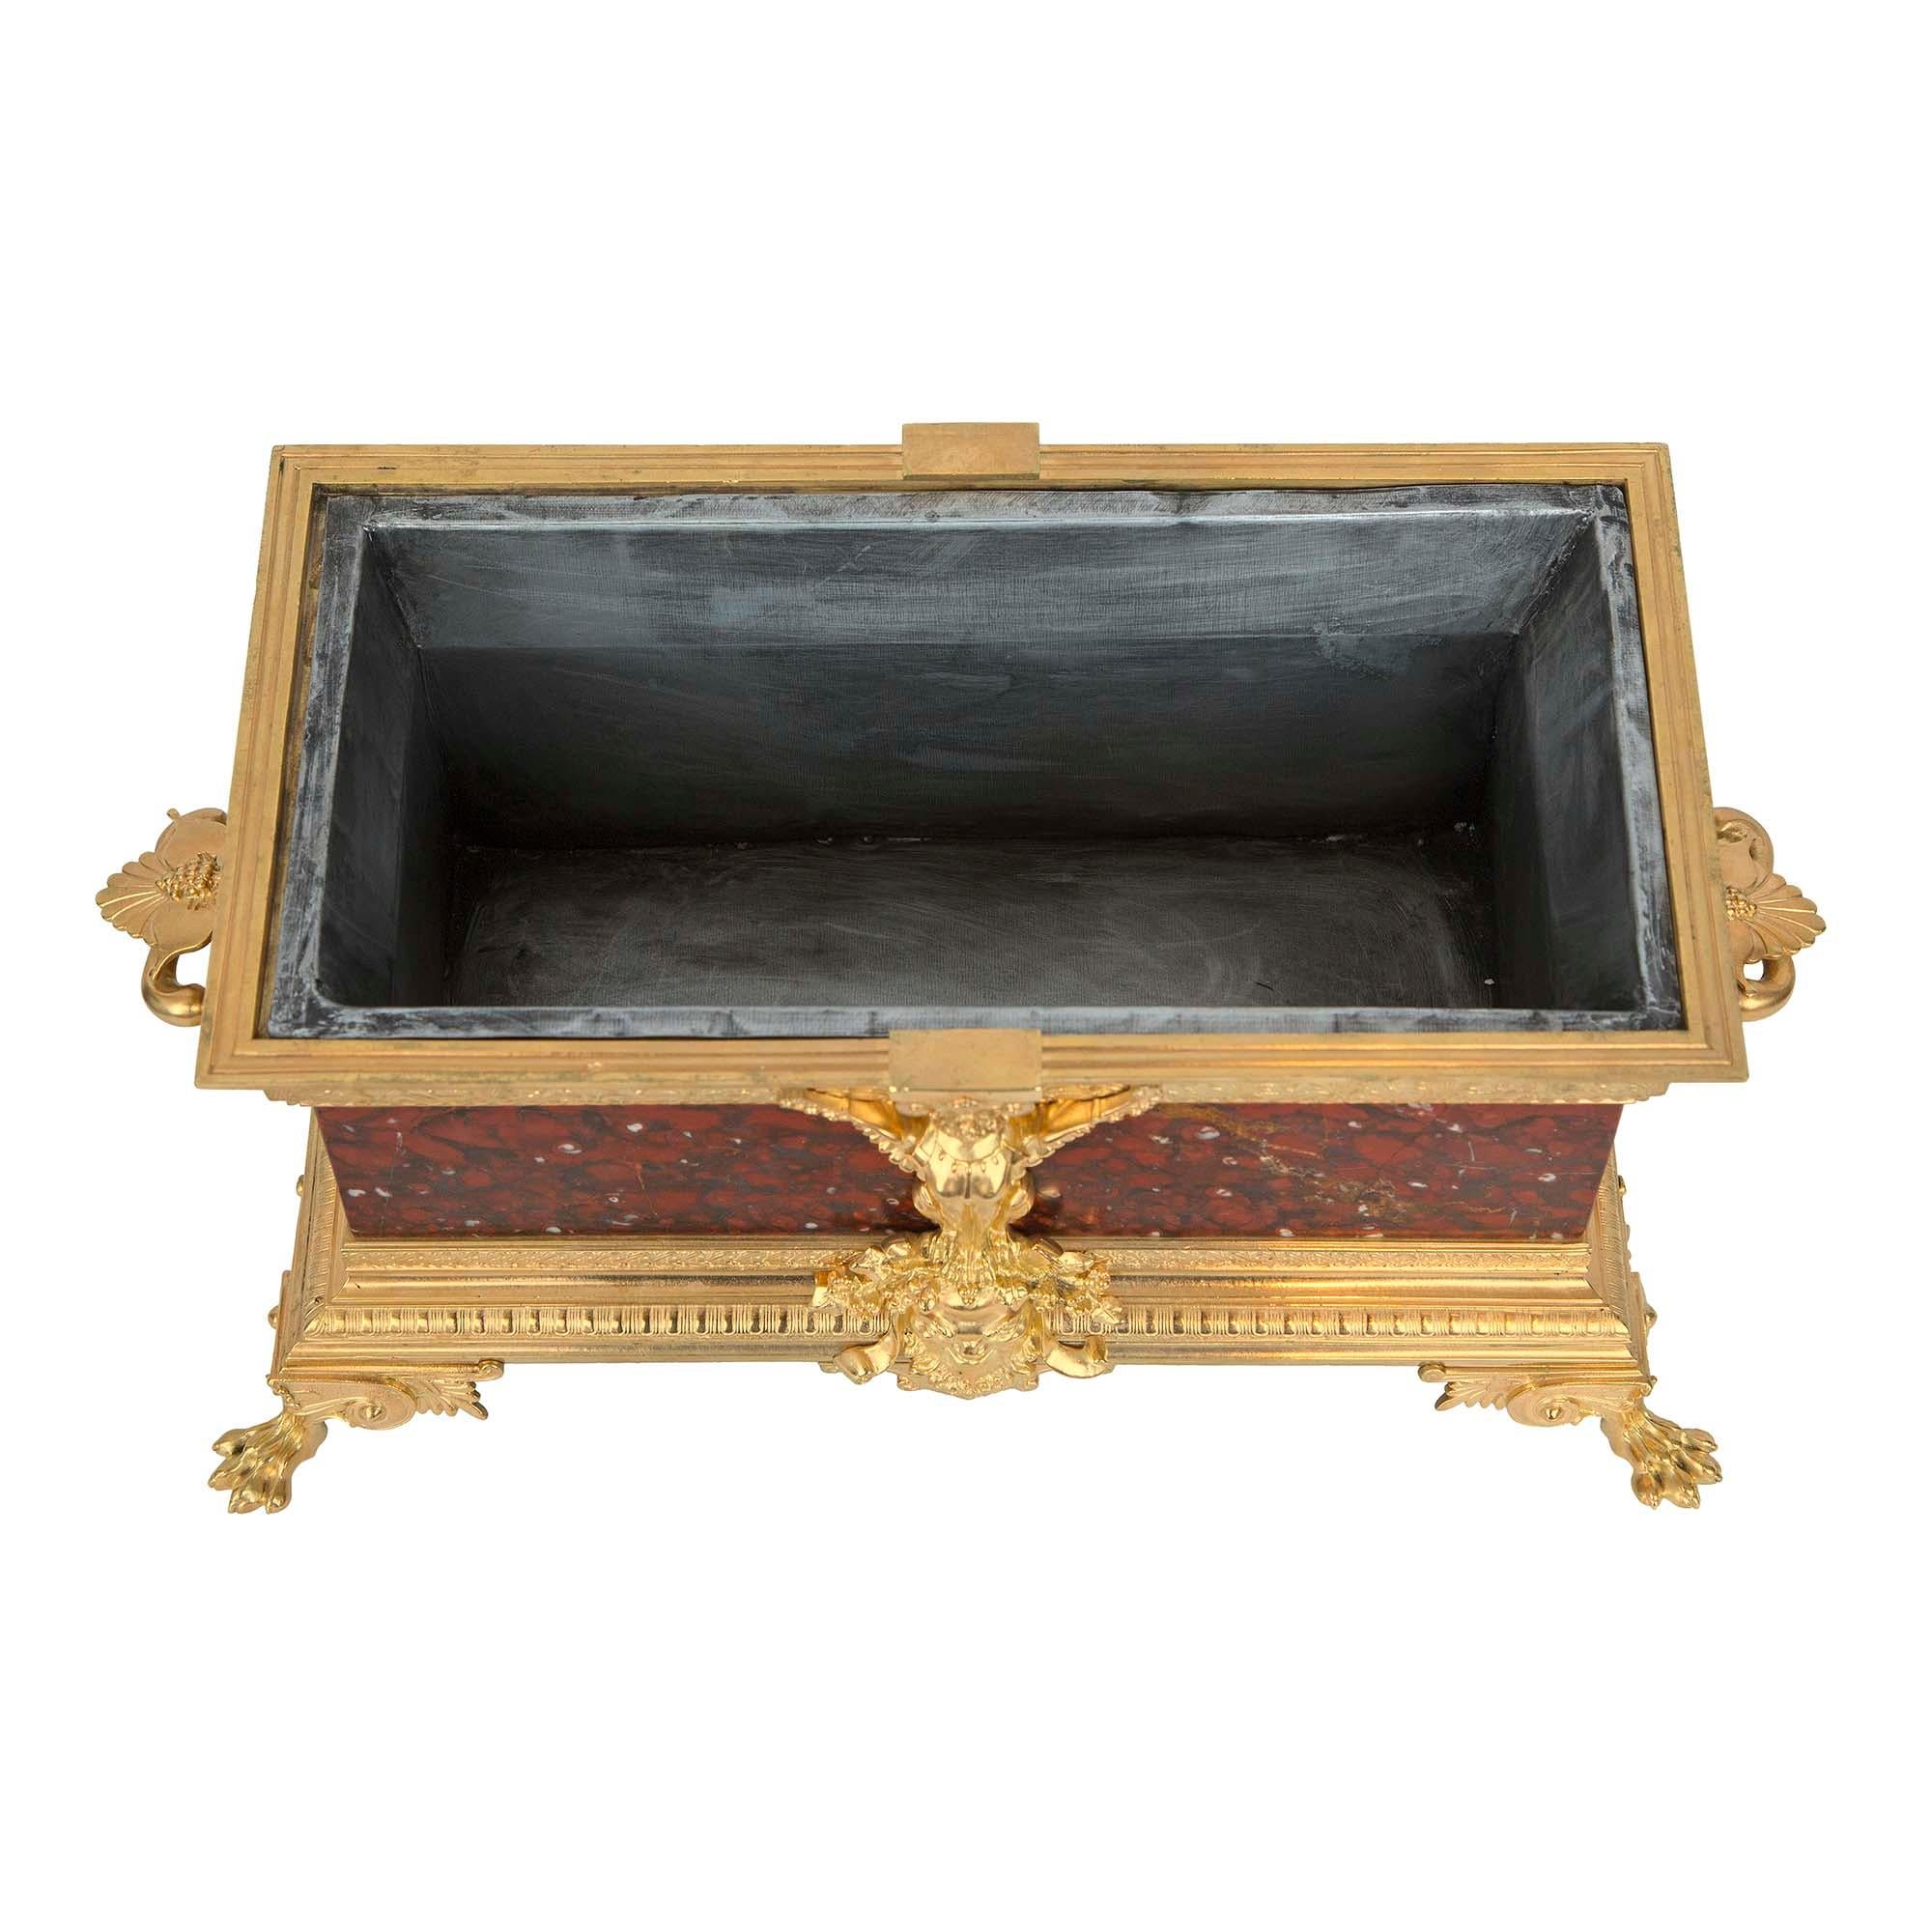 A striking French 19th century Renaissance St. Rouge Griotte marble and ormolu planter. The planter is raised by handsome ormolu paw feet below a scrolled design and palmettes with a hammered pattern. The impressive base displays fine foliate